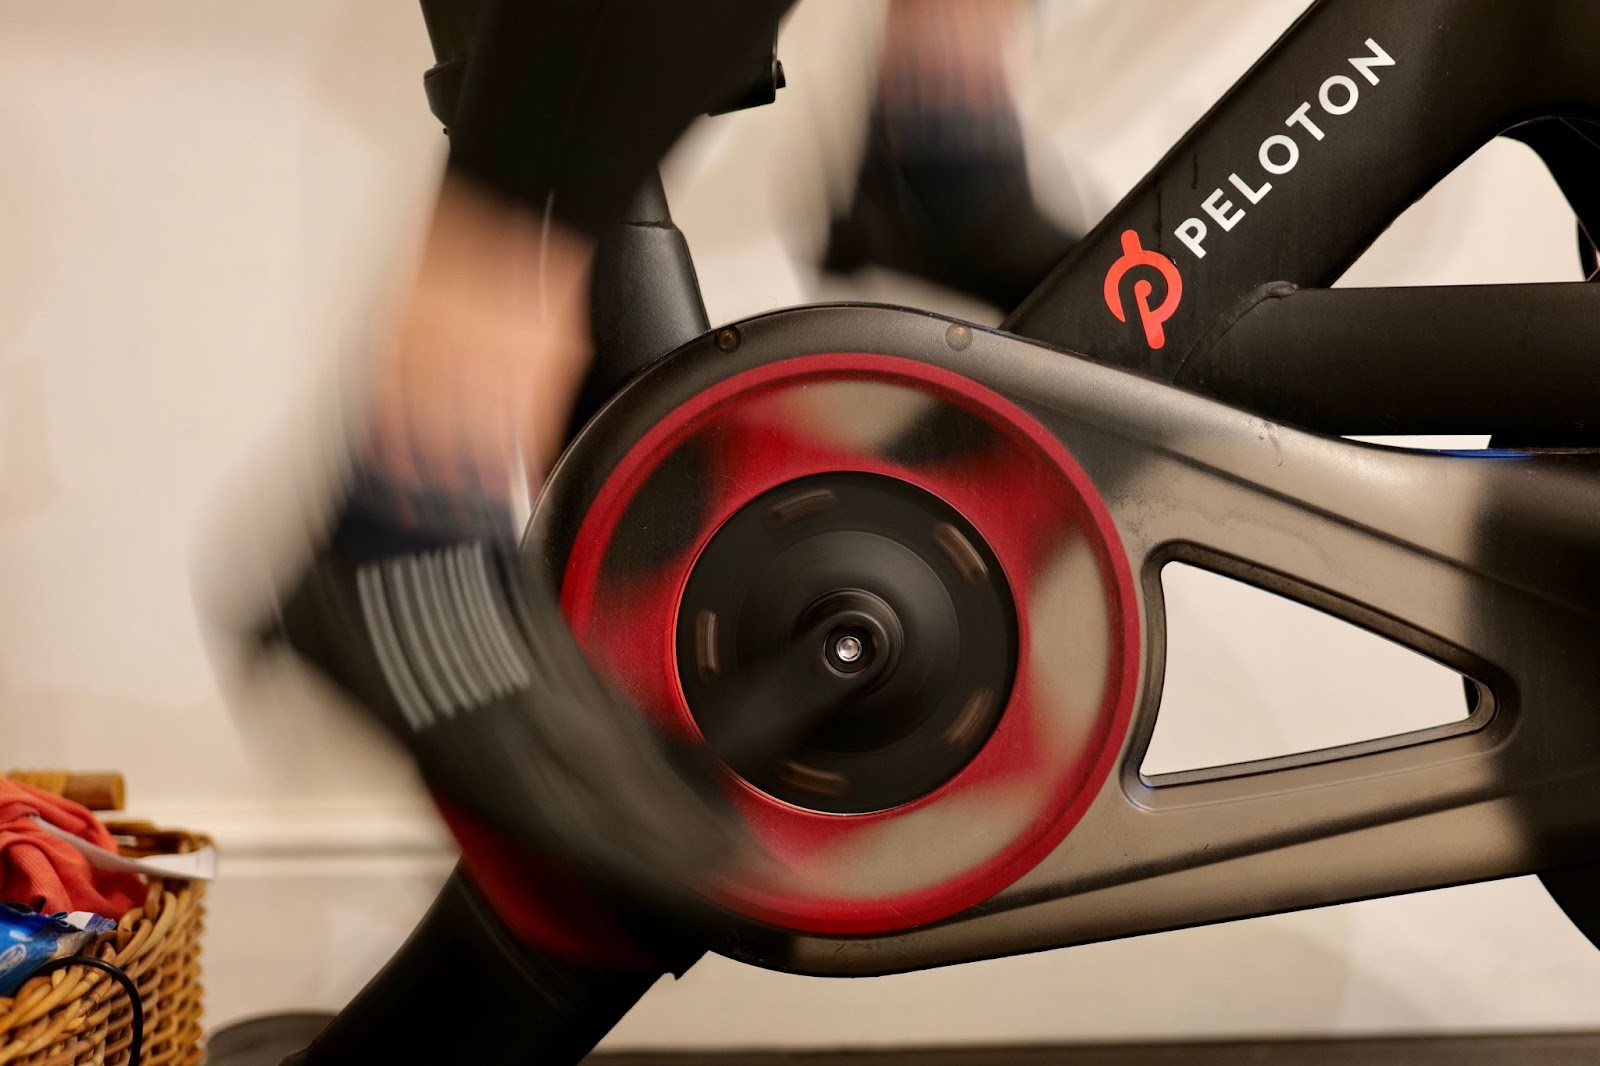 Shoes and cleats are the first step for success with fitting your spin bike.